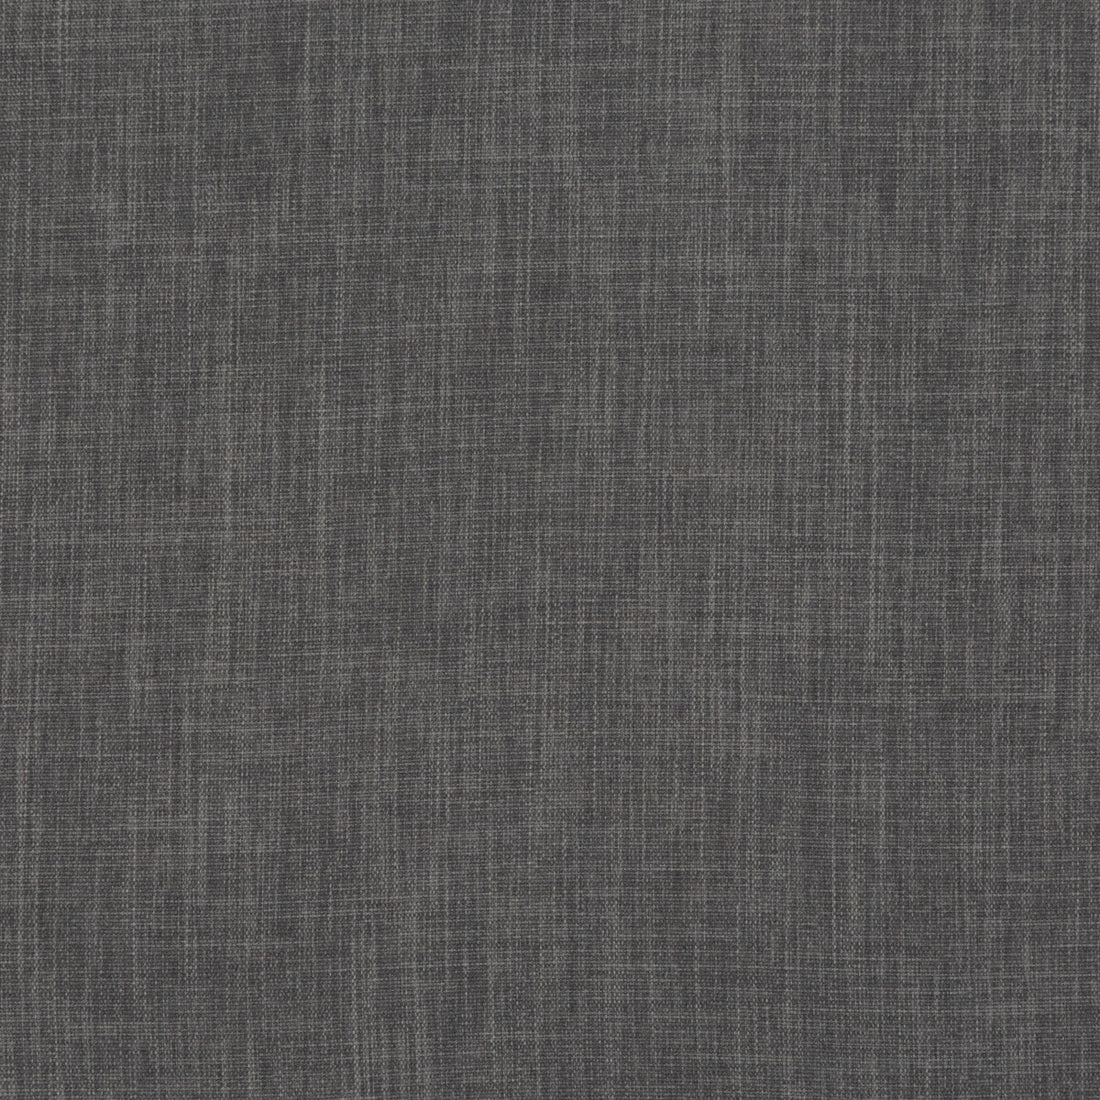 Fernshaw fabric in graphite color - pattern PF50410.970.0 - by Baker Lifestyle in the Notebooks collection